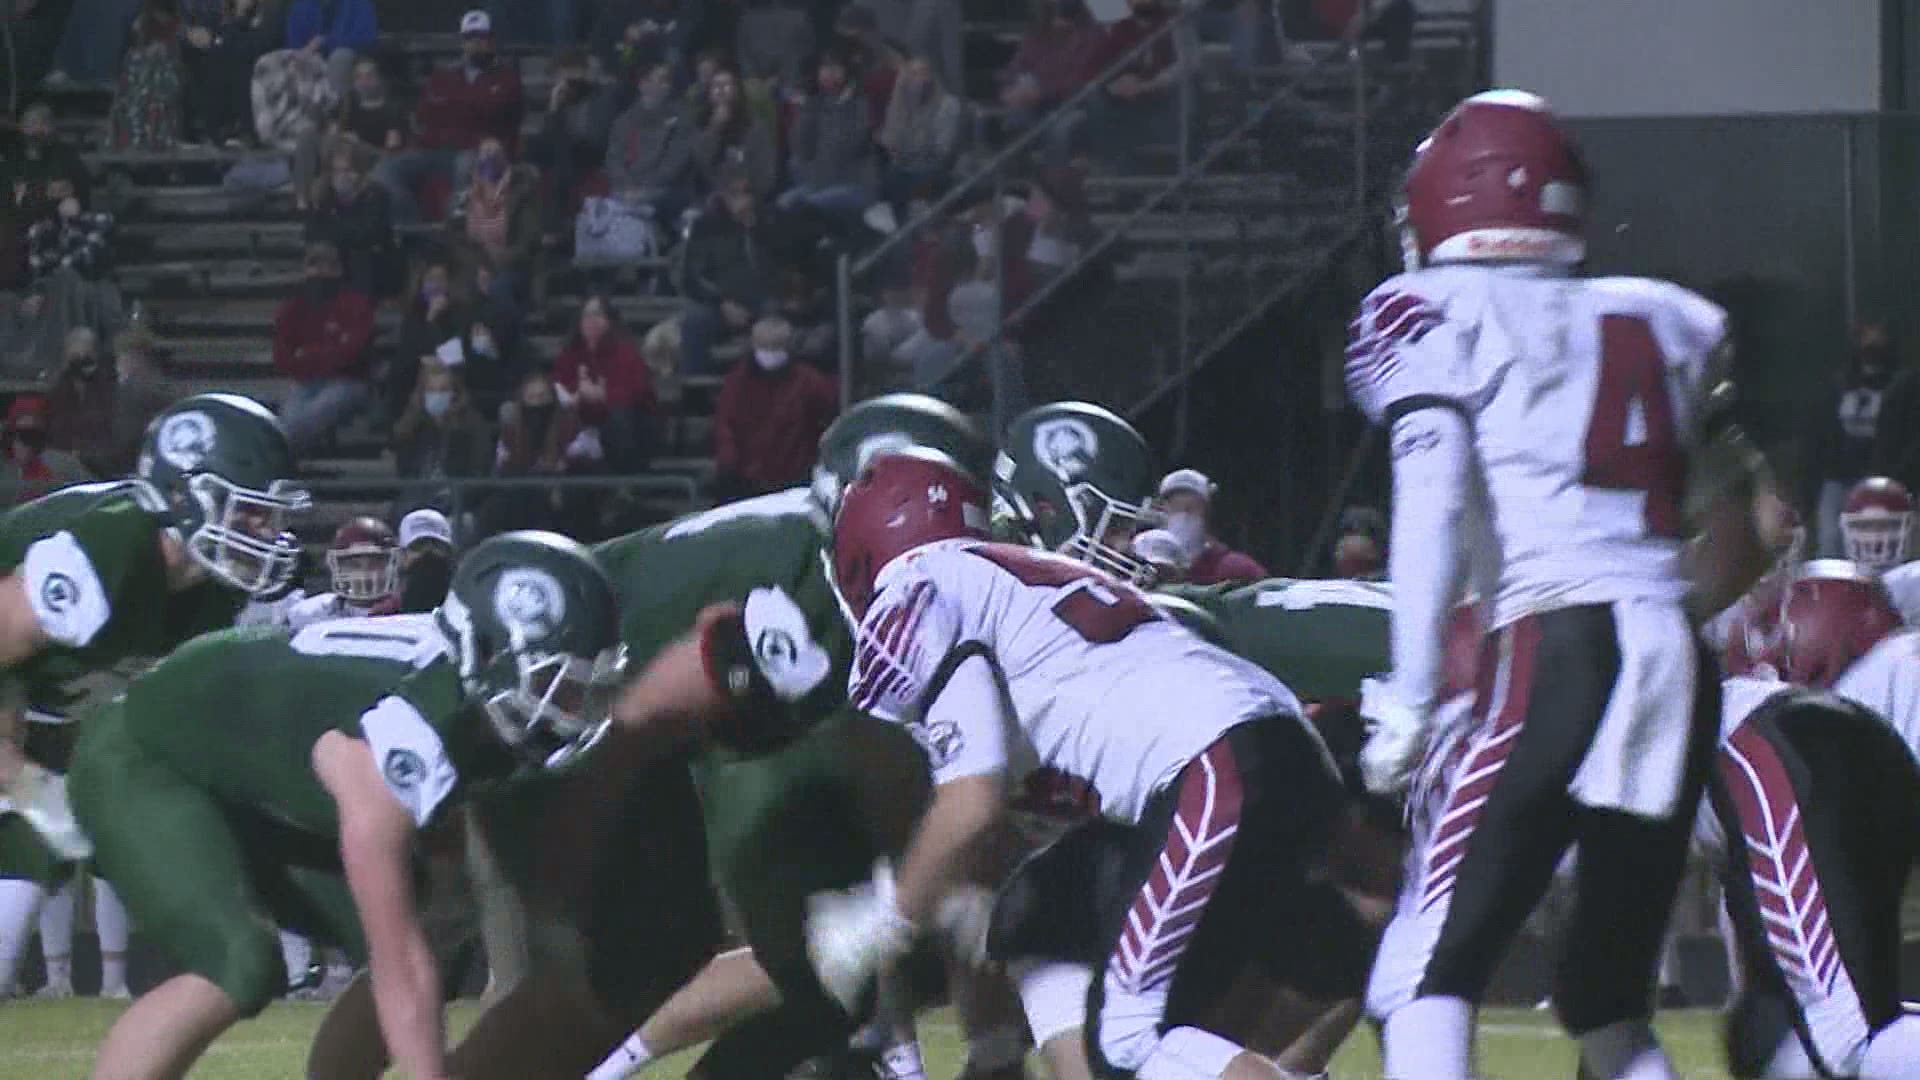 Highlights from the match-up between West Catholic and Portland.